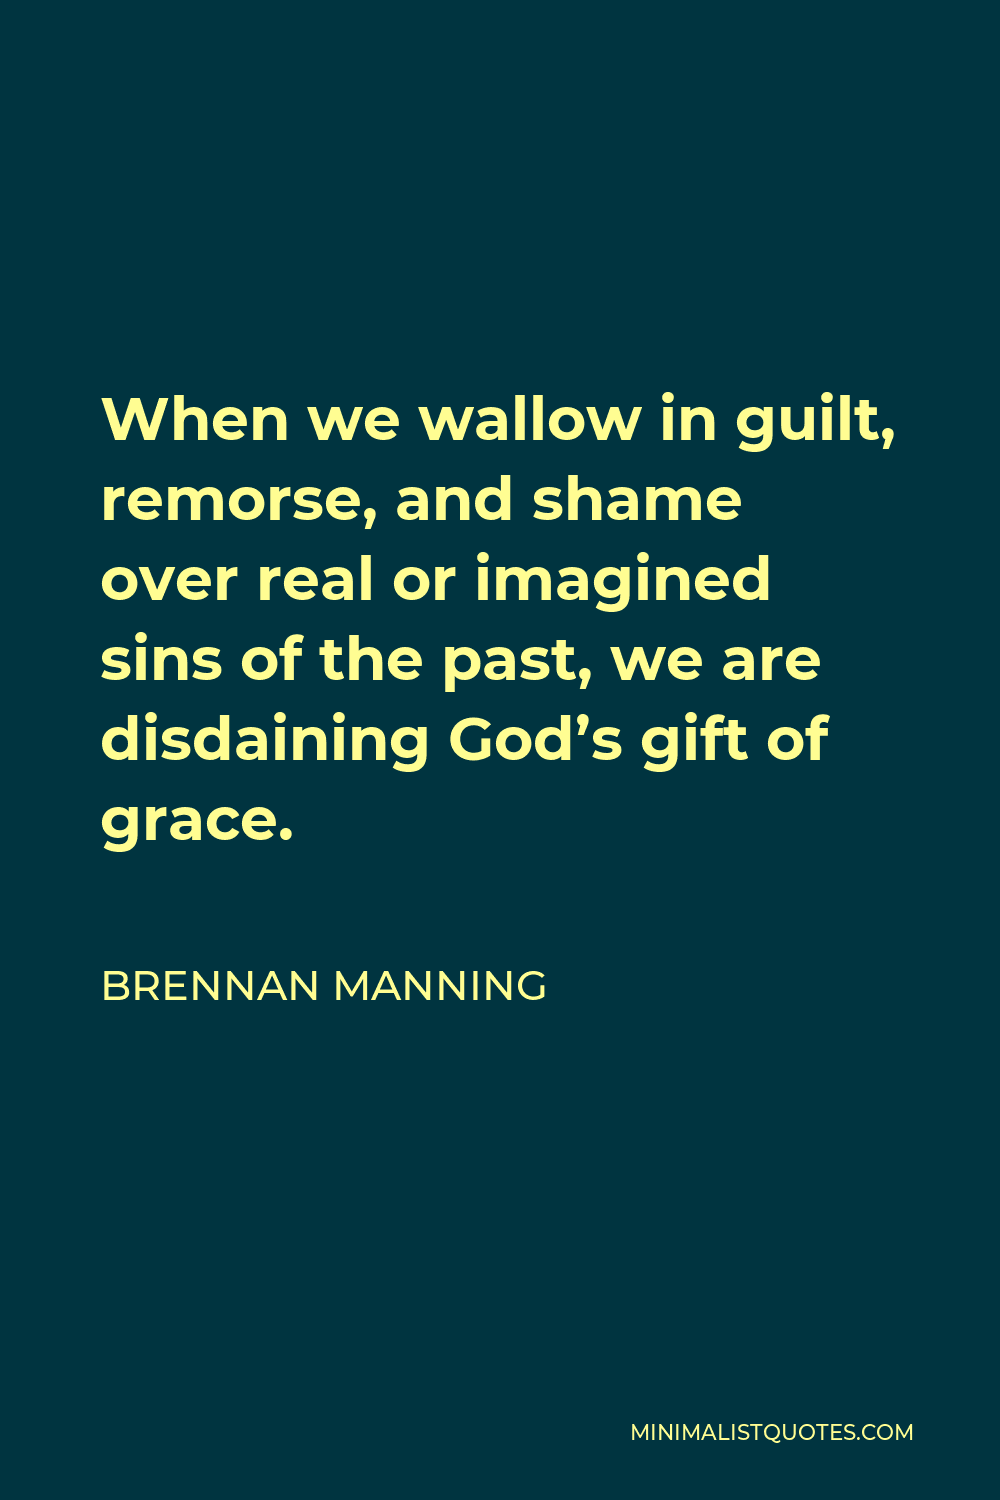 Brennan Manning Quote - When we wallow in guilt, remorse, and shame over real or imagined sins of the past, we are disdaining God’s gift of grace.